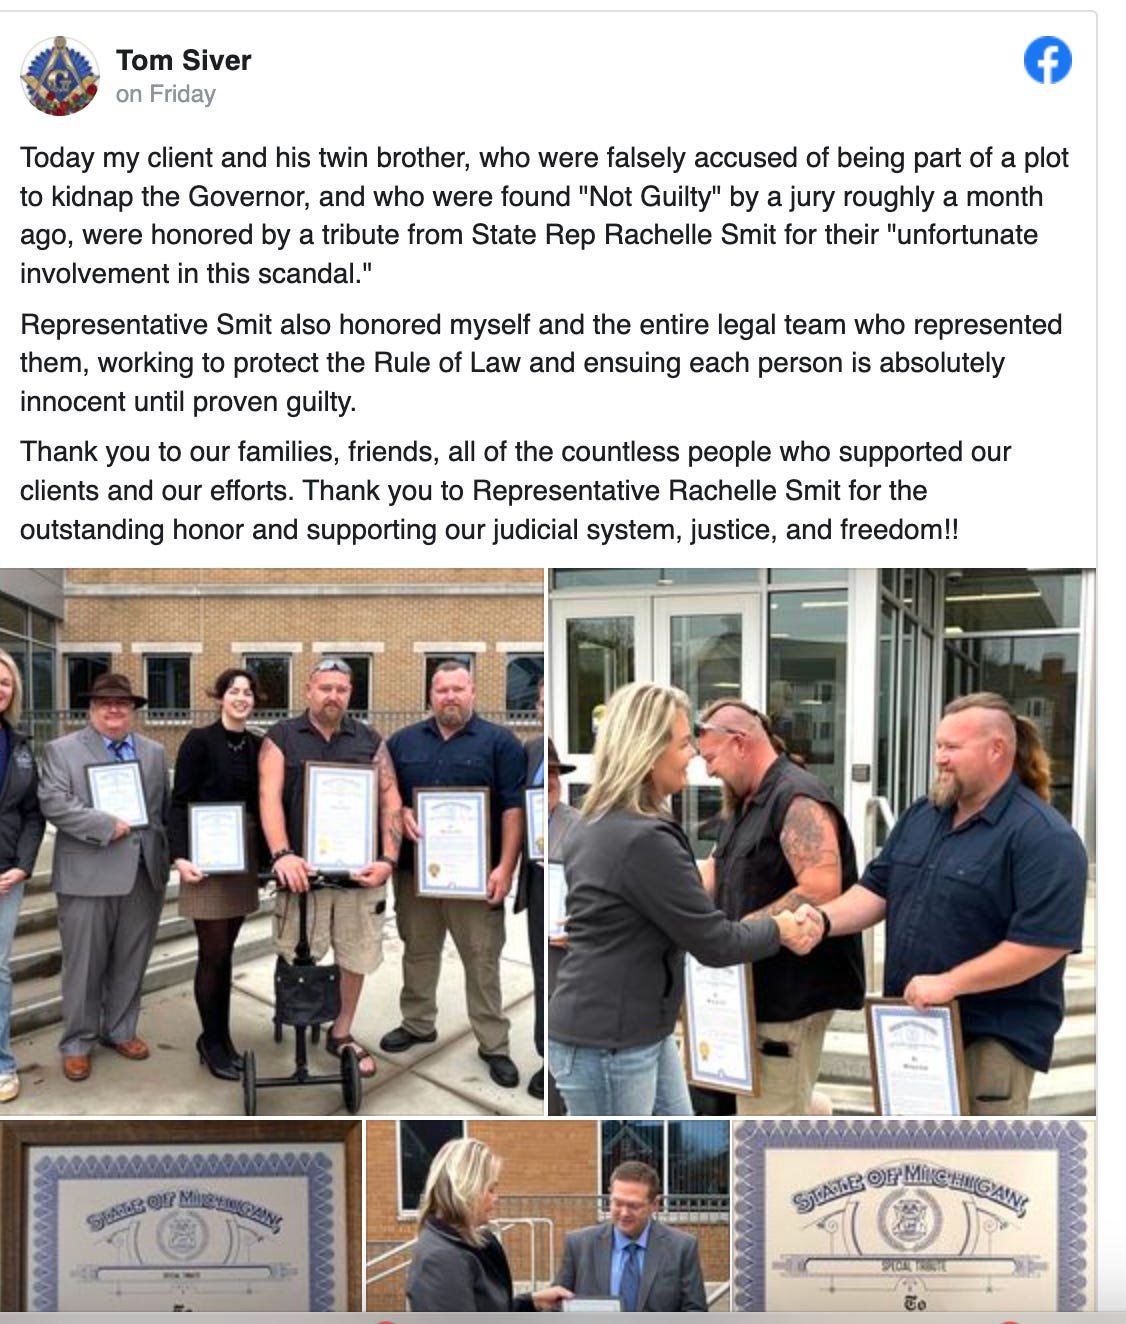 Today my client and his twin brother, who were falsely accused of being part of a plot to kidnap the Governor, and who were found "Not Guilty" by a jury roughly a month ago, were honored by a tribute from State Rep Rachelle Smit for their "unfortunate involvement in this scandal." Representative Smit also honored myself and the entire legal team who represented them, working to protect the Rule of Law and ensuing each person is absolutely innocent until proven guilty. Thank you to our families, friends, all of the countless people who supported our clients and our efforts.  Thank you to Representative Rachelle Smit for the outstanding honor and supporting our judicial system, justice, and freedom!! -- Tom Siver Facebook post